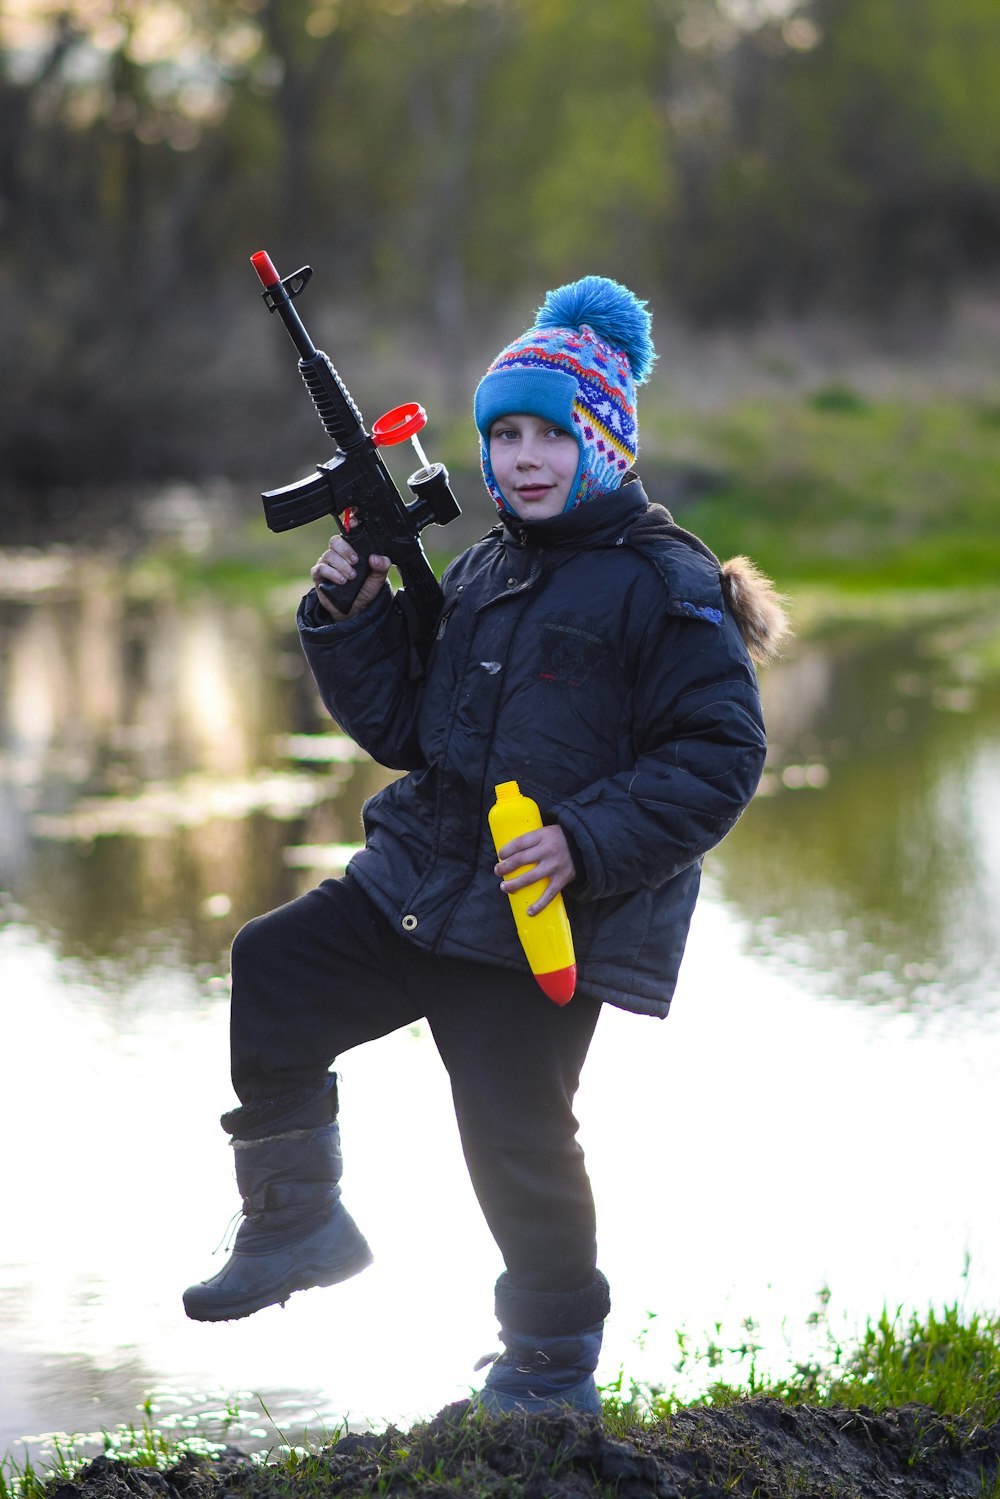 a young boy is holding a toy gun